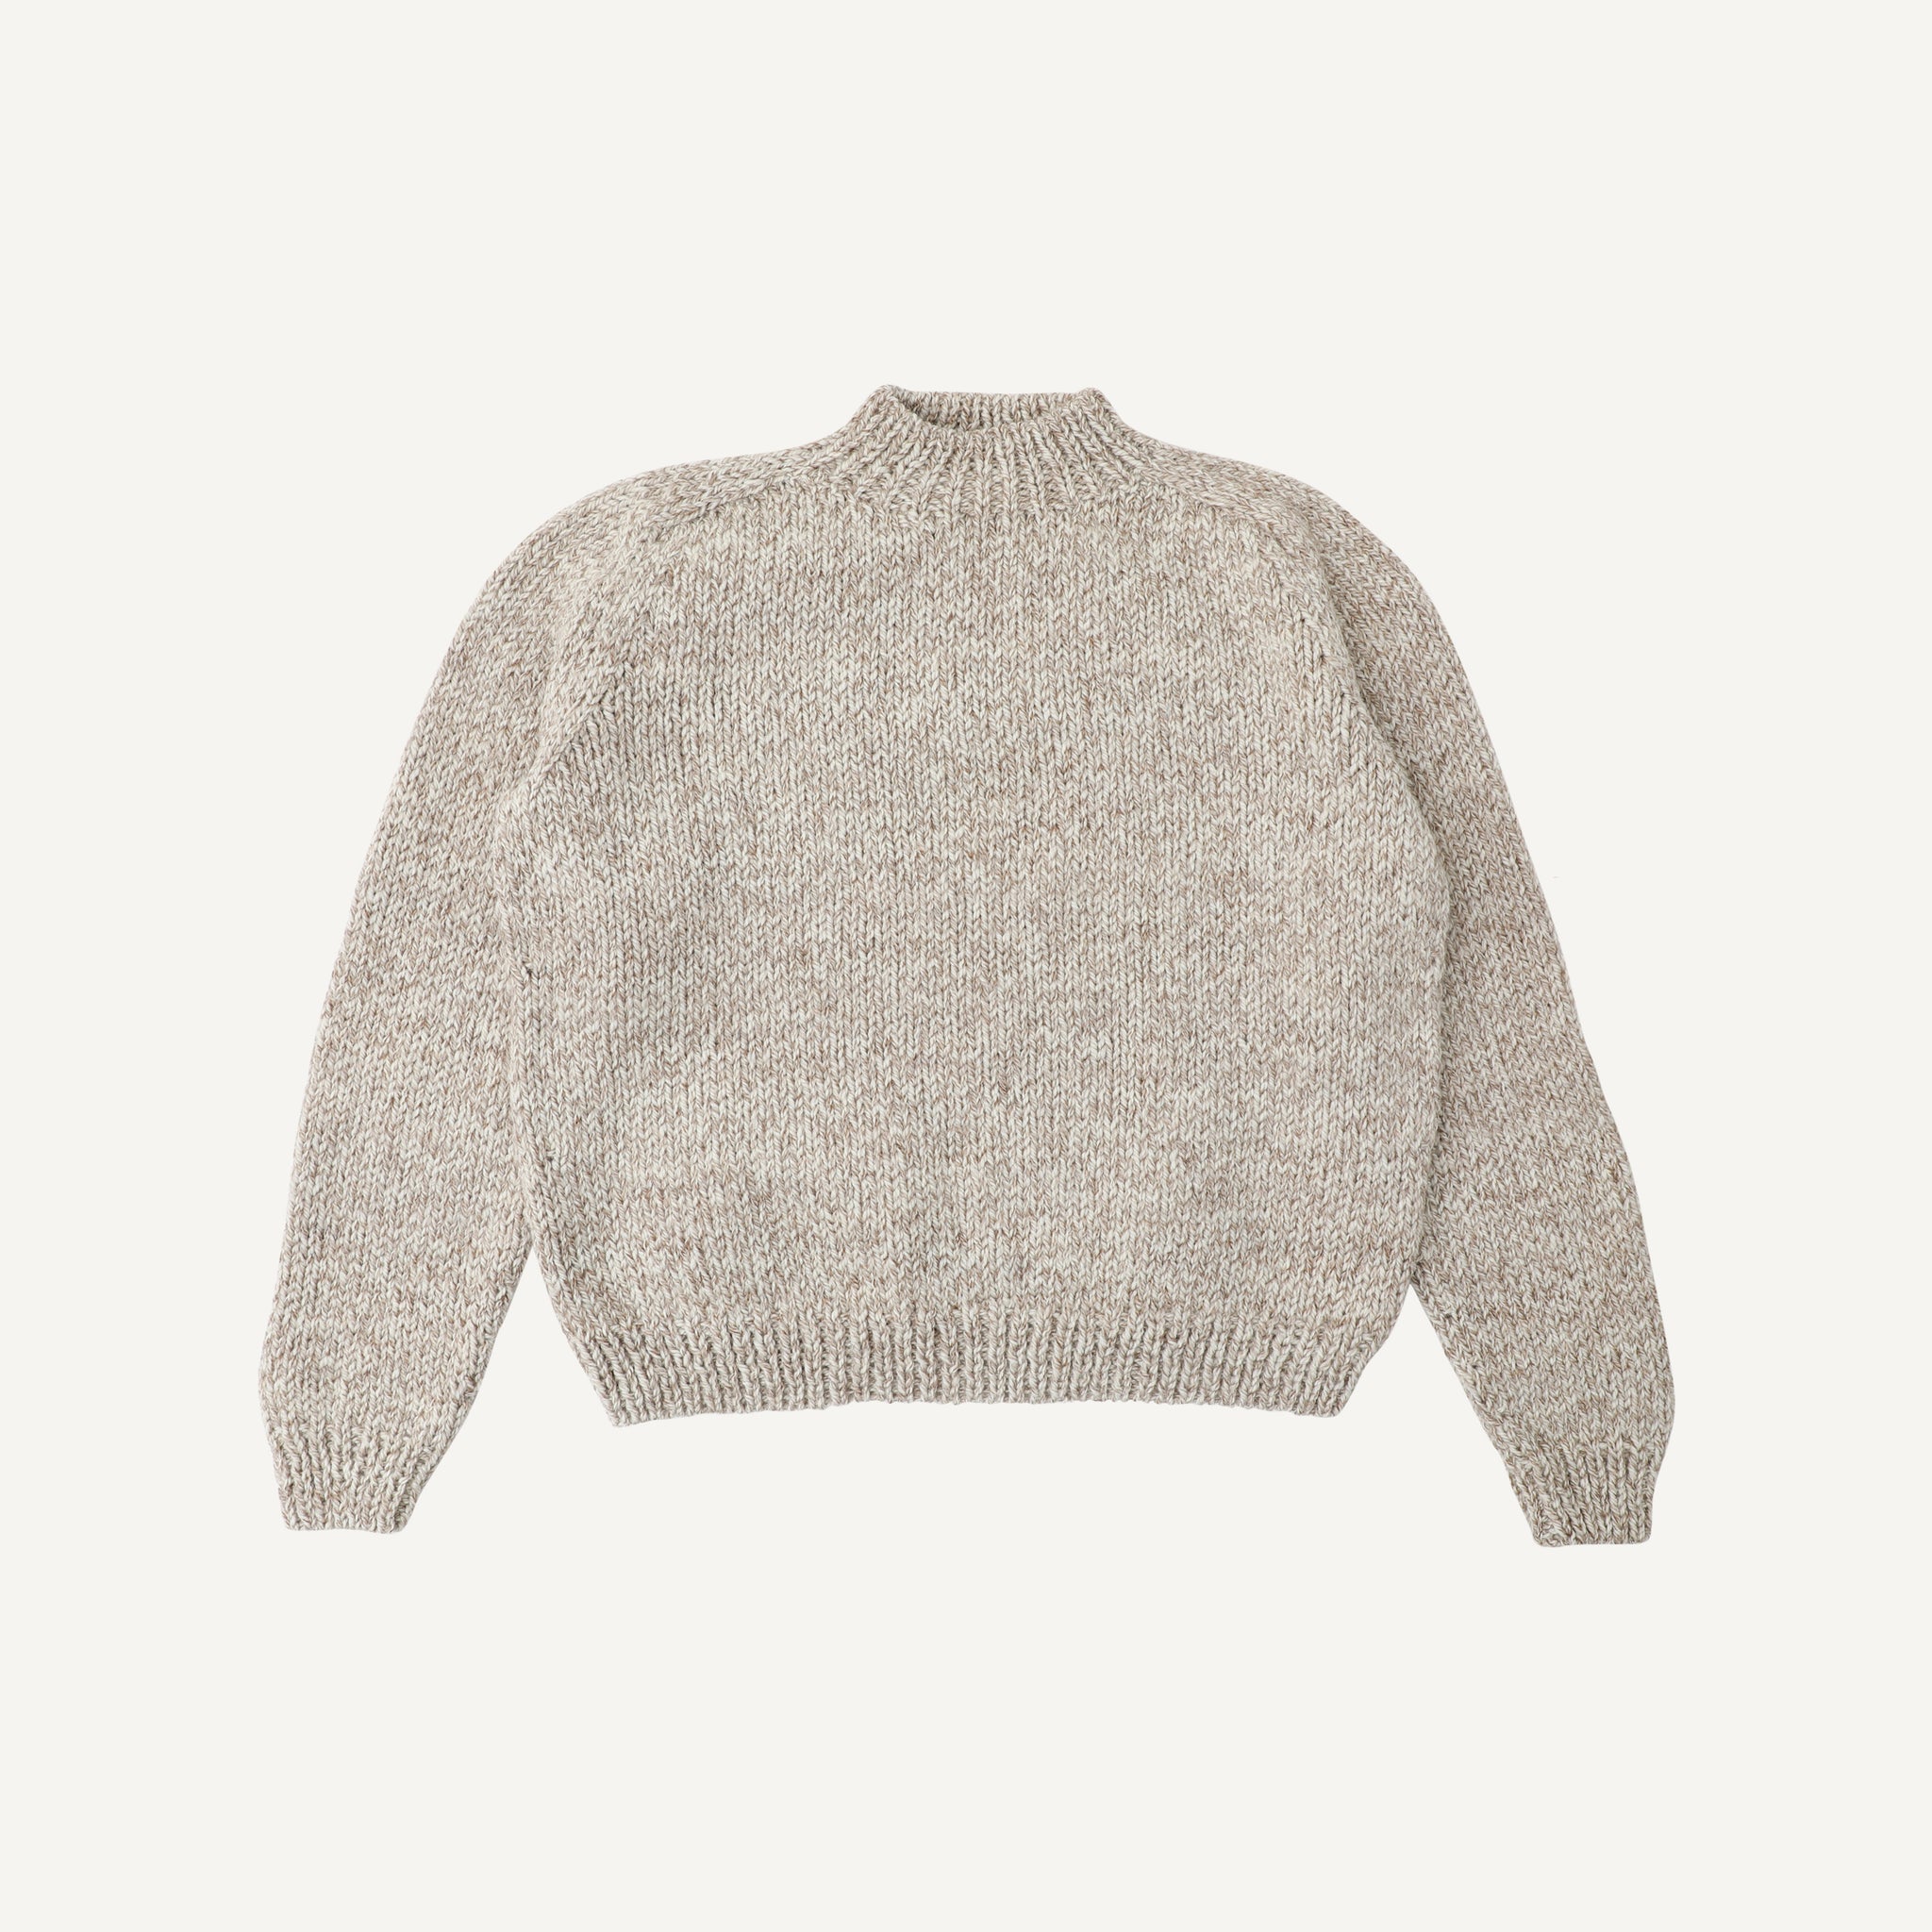 OUND MOLLE SWEATER